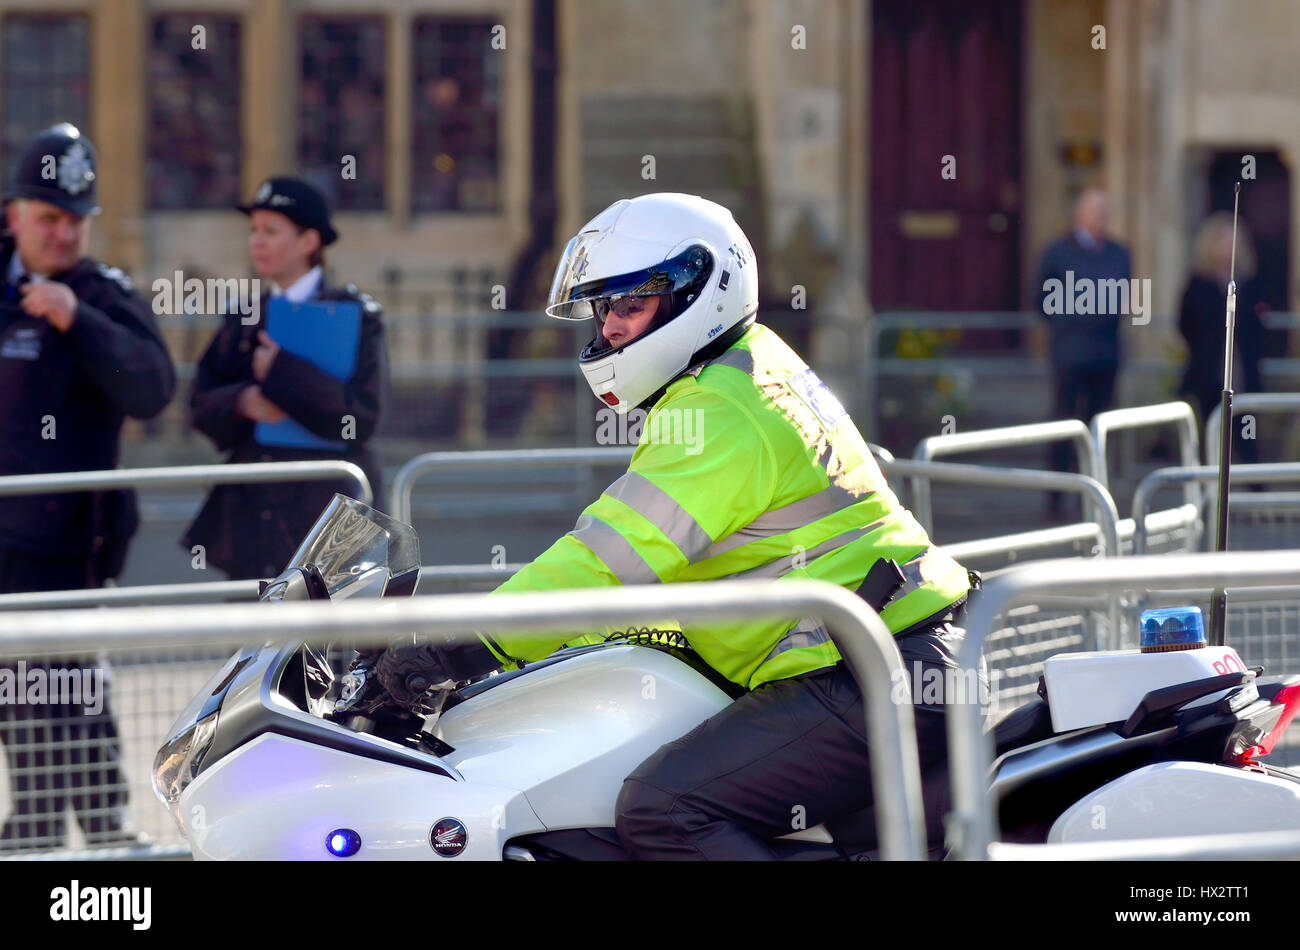 London, England, UK. Member of the Metropolitan Police Special Escort Group accompanying the Queen's car arriving at Westminster Abbey Stock Photo